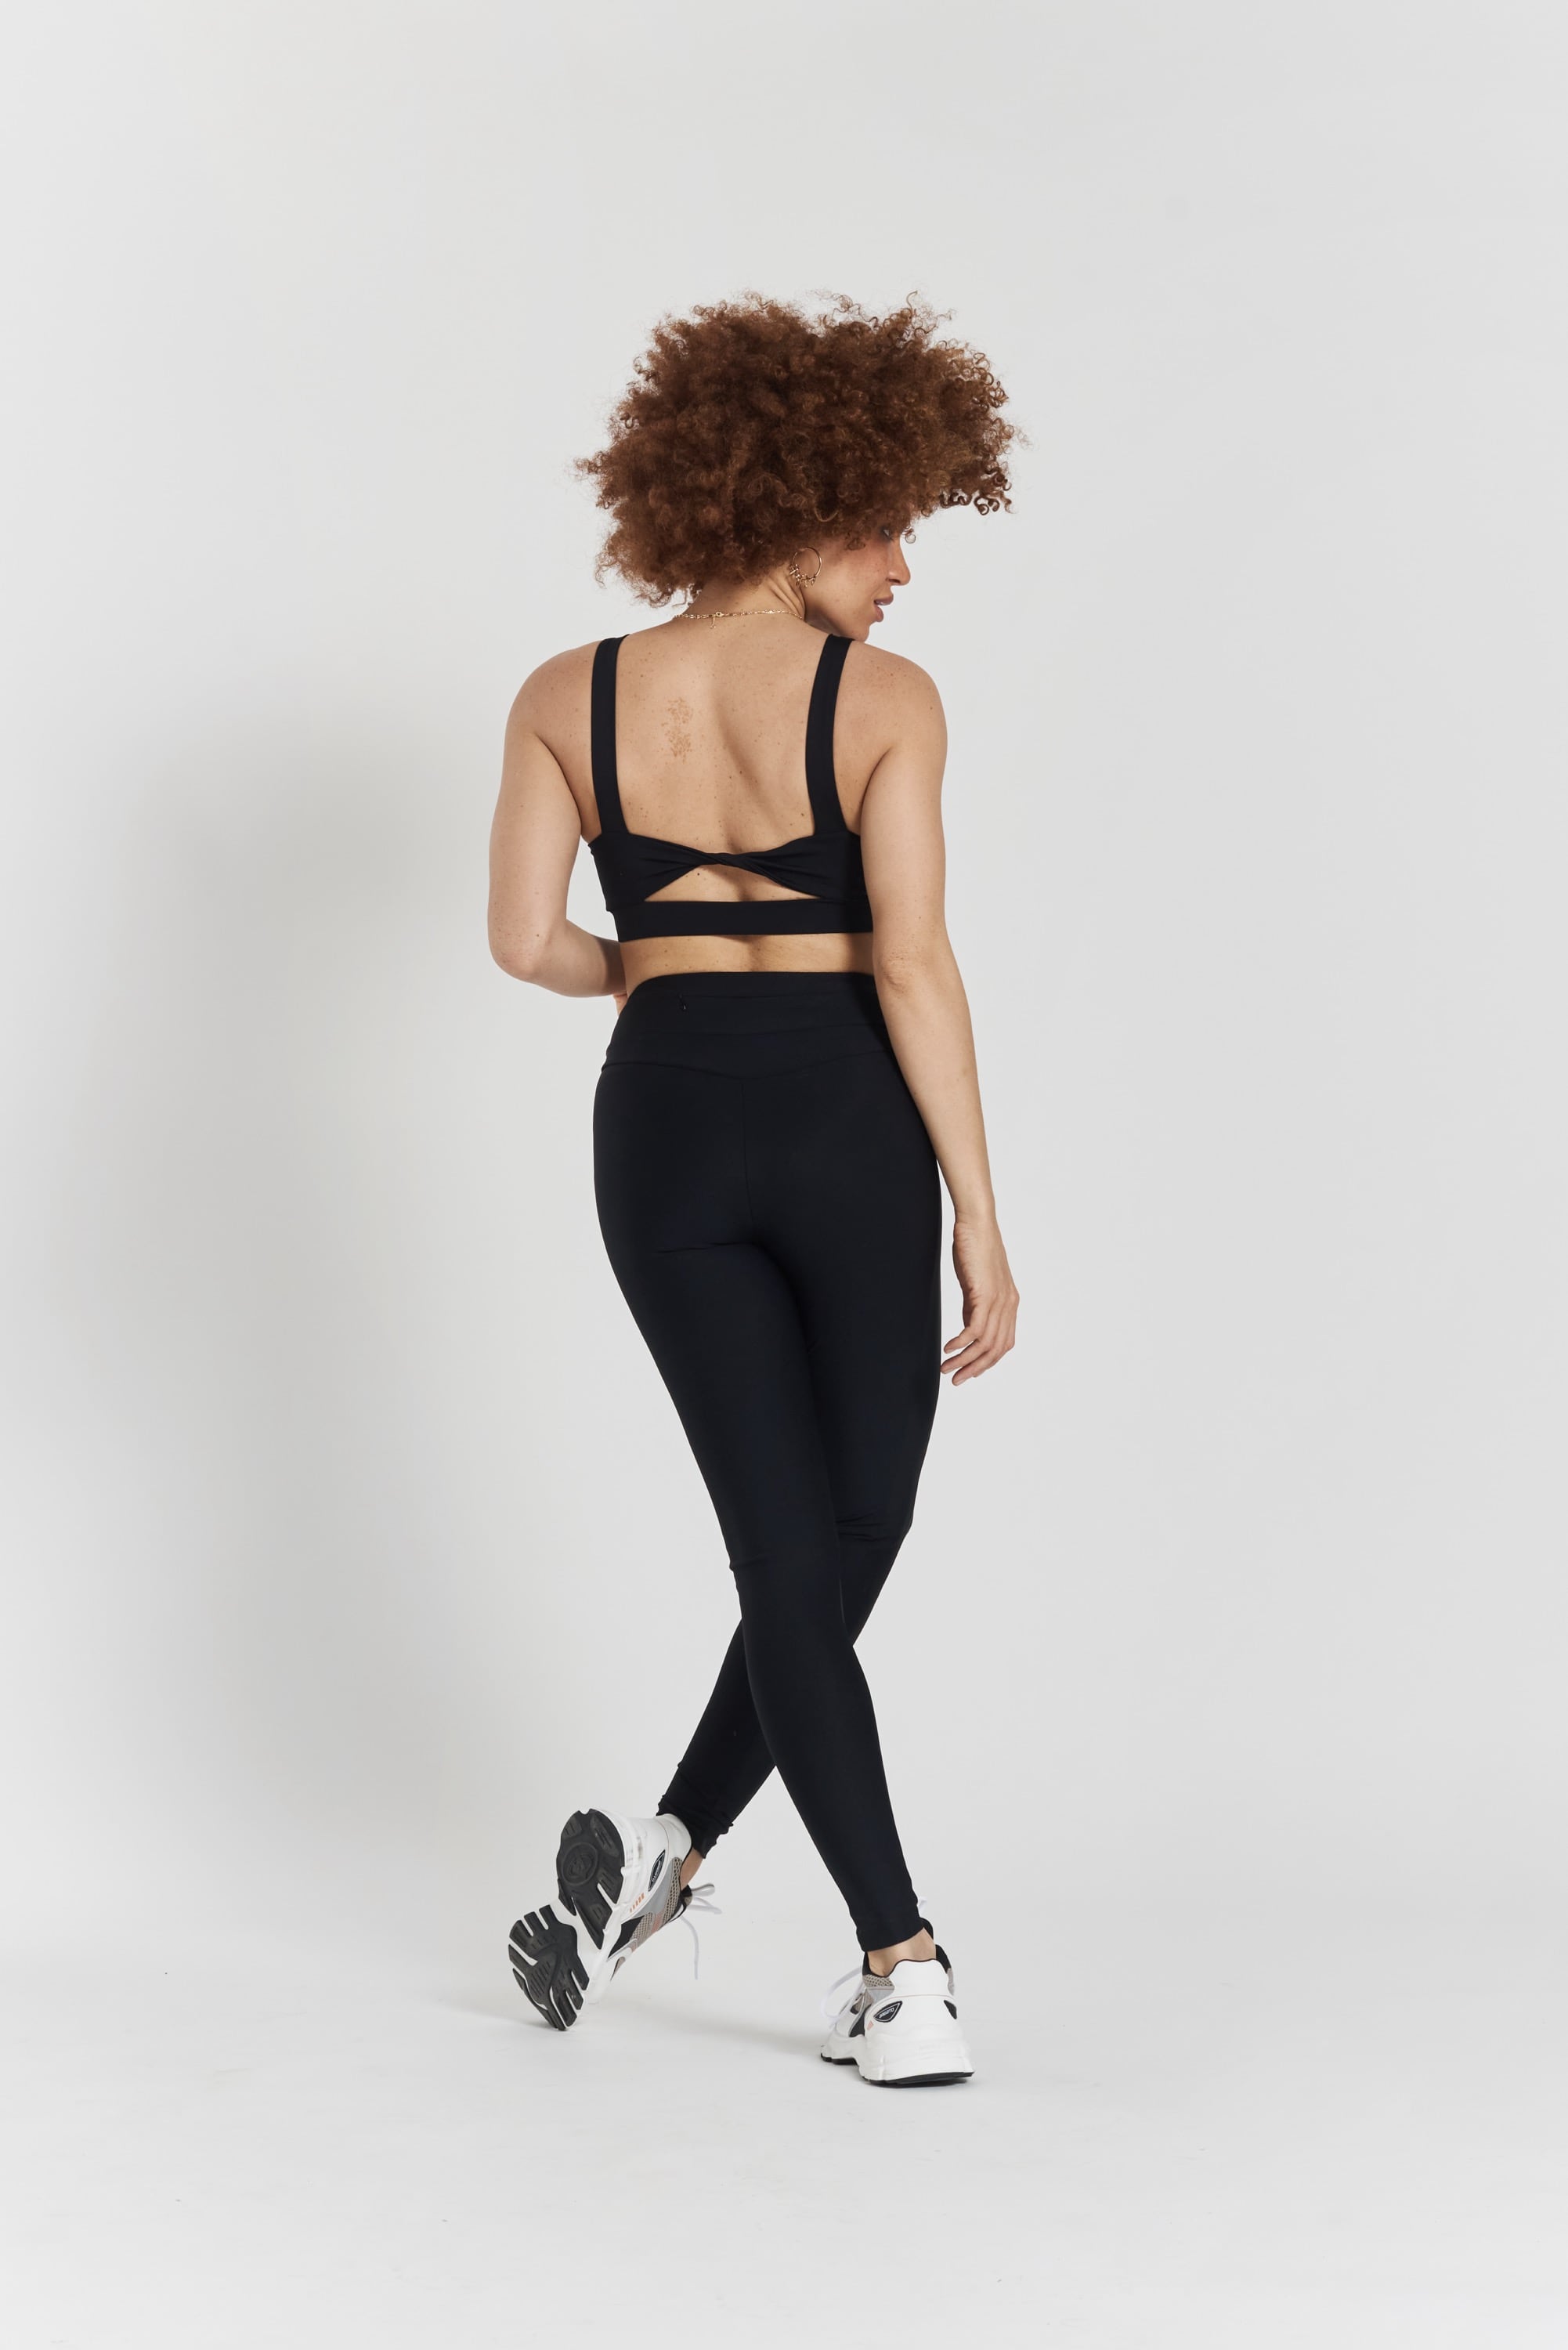 Cycad recycled-fabric performance leggings - Volcanic Black